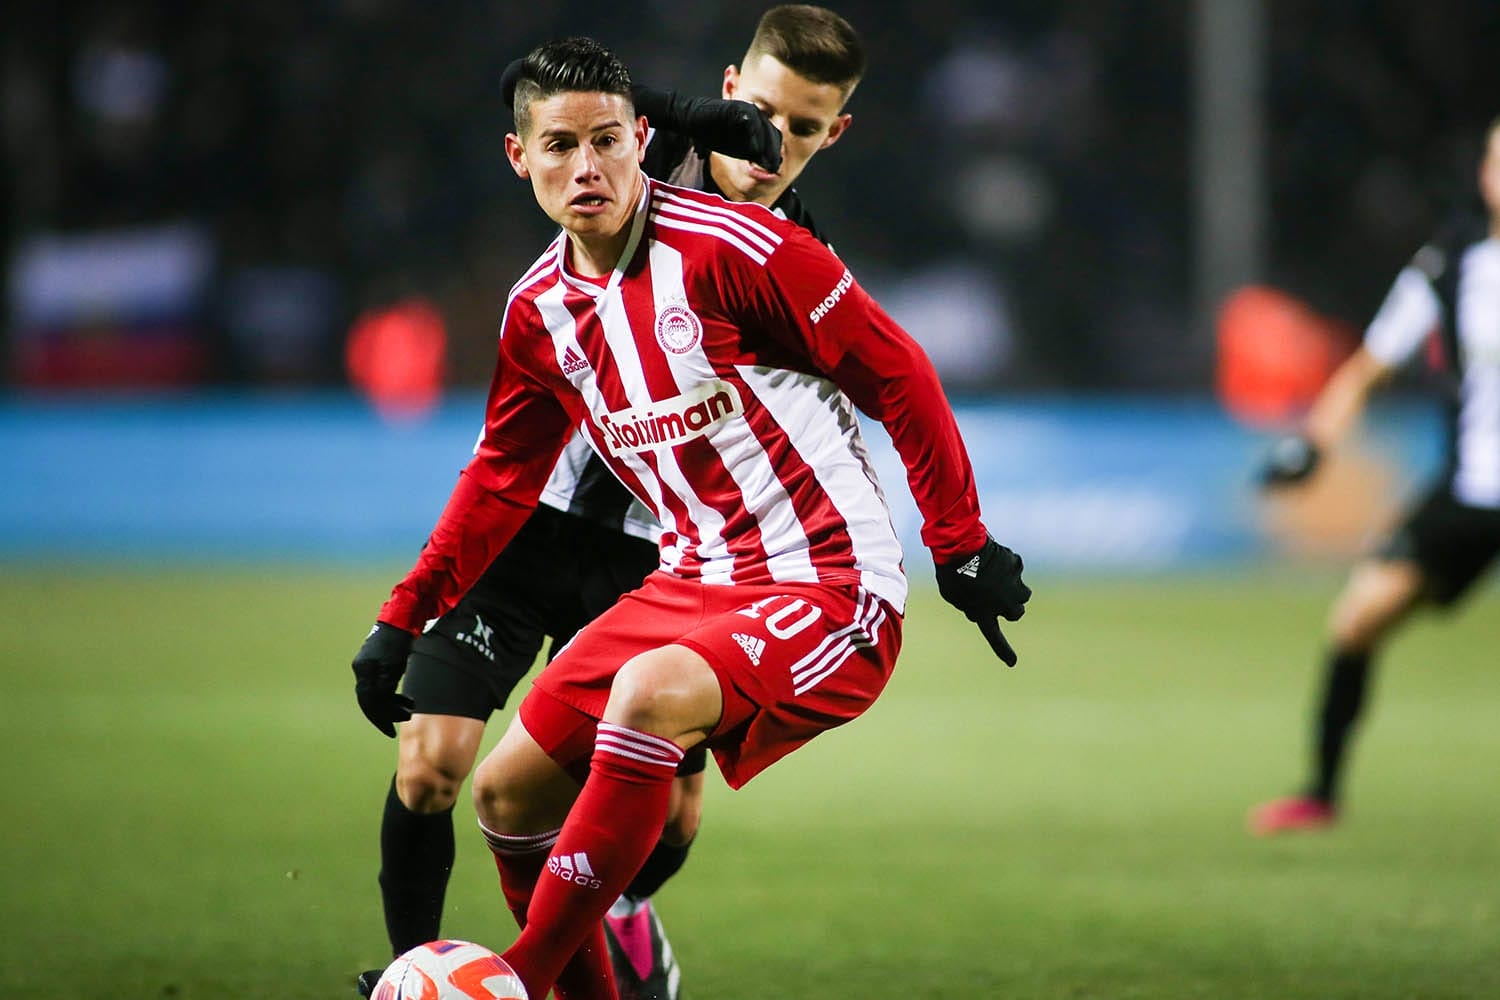 Thessaloniki, Greece - Feb 05, 2023. Olympiacos's player James Rodriguez in action during a Greek Superleague soccer game between PAOK FC and Olympiacos FC.